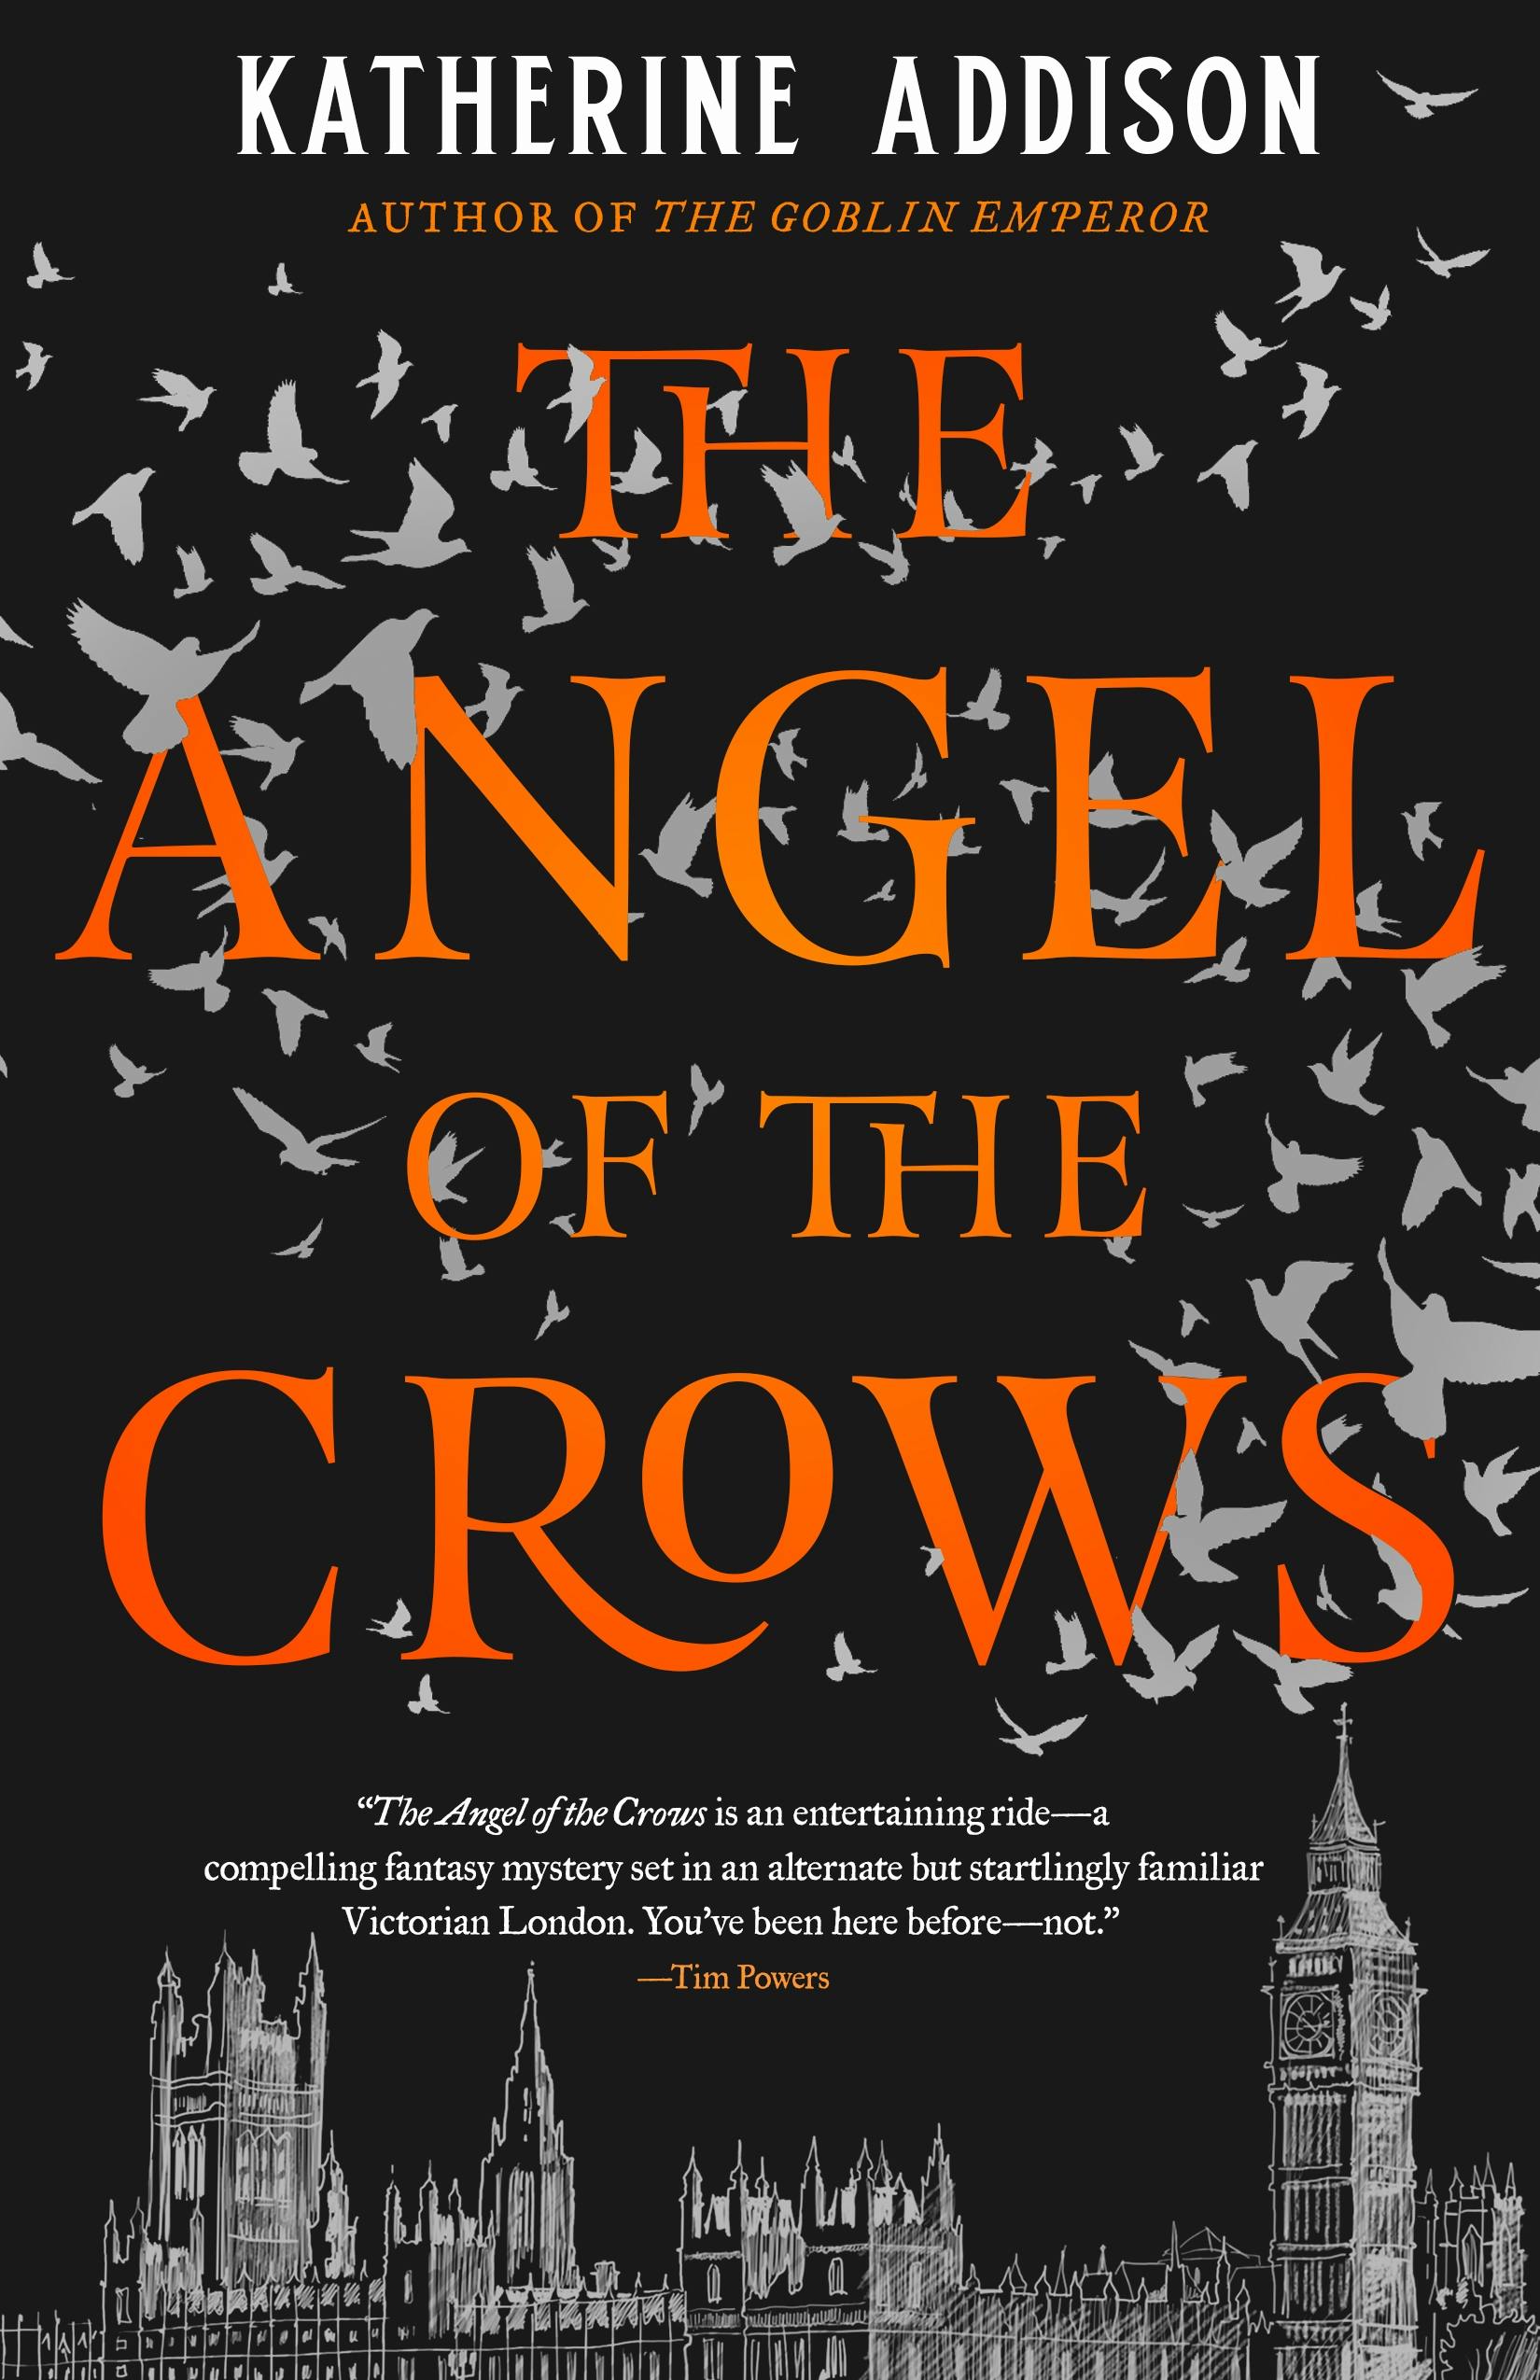 Cover for the book titled as: The Angel of the Crows